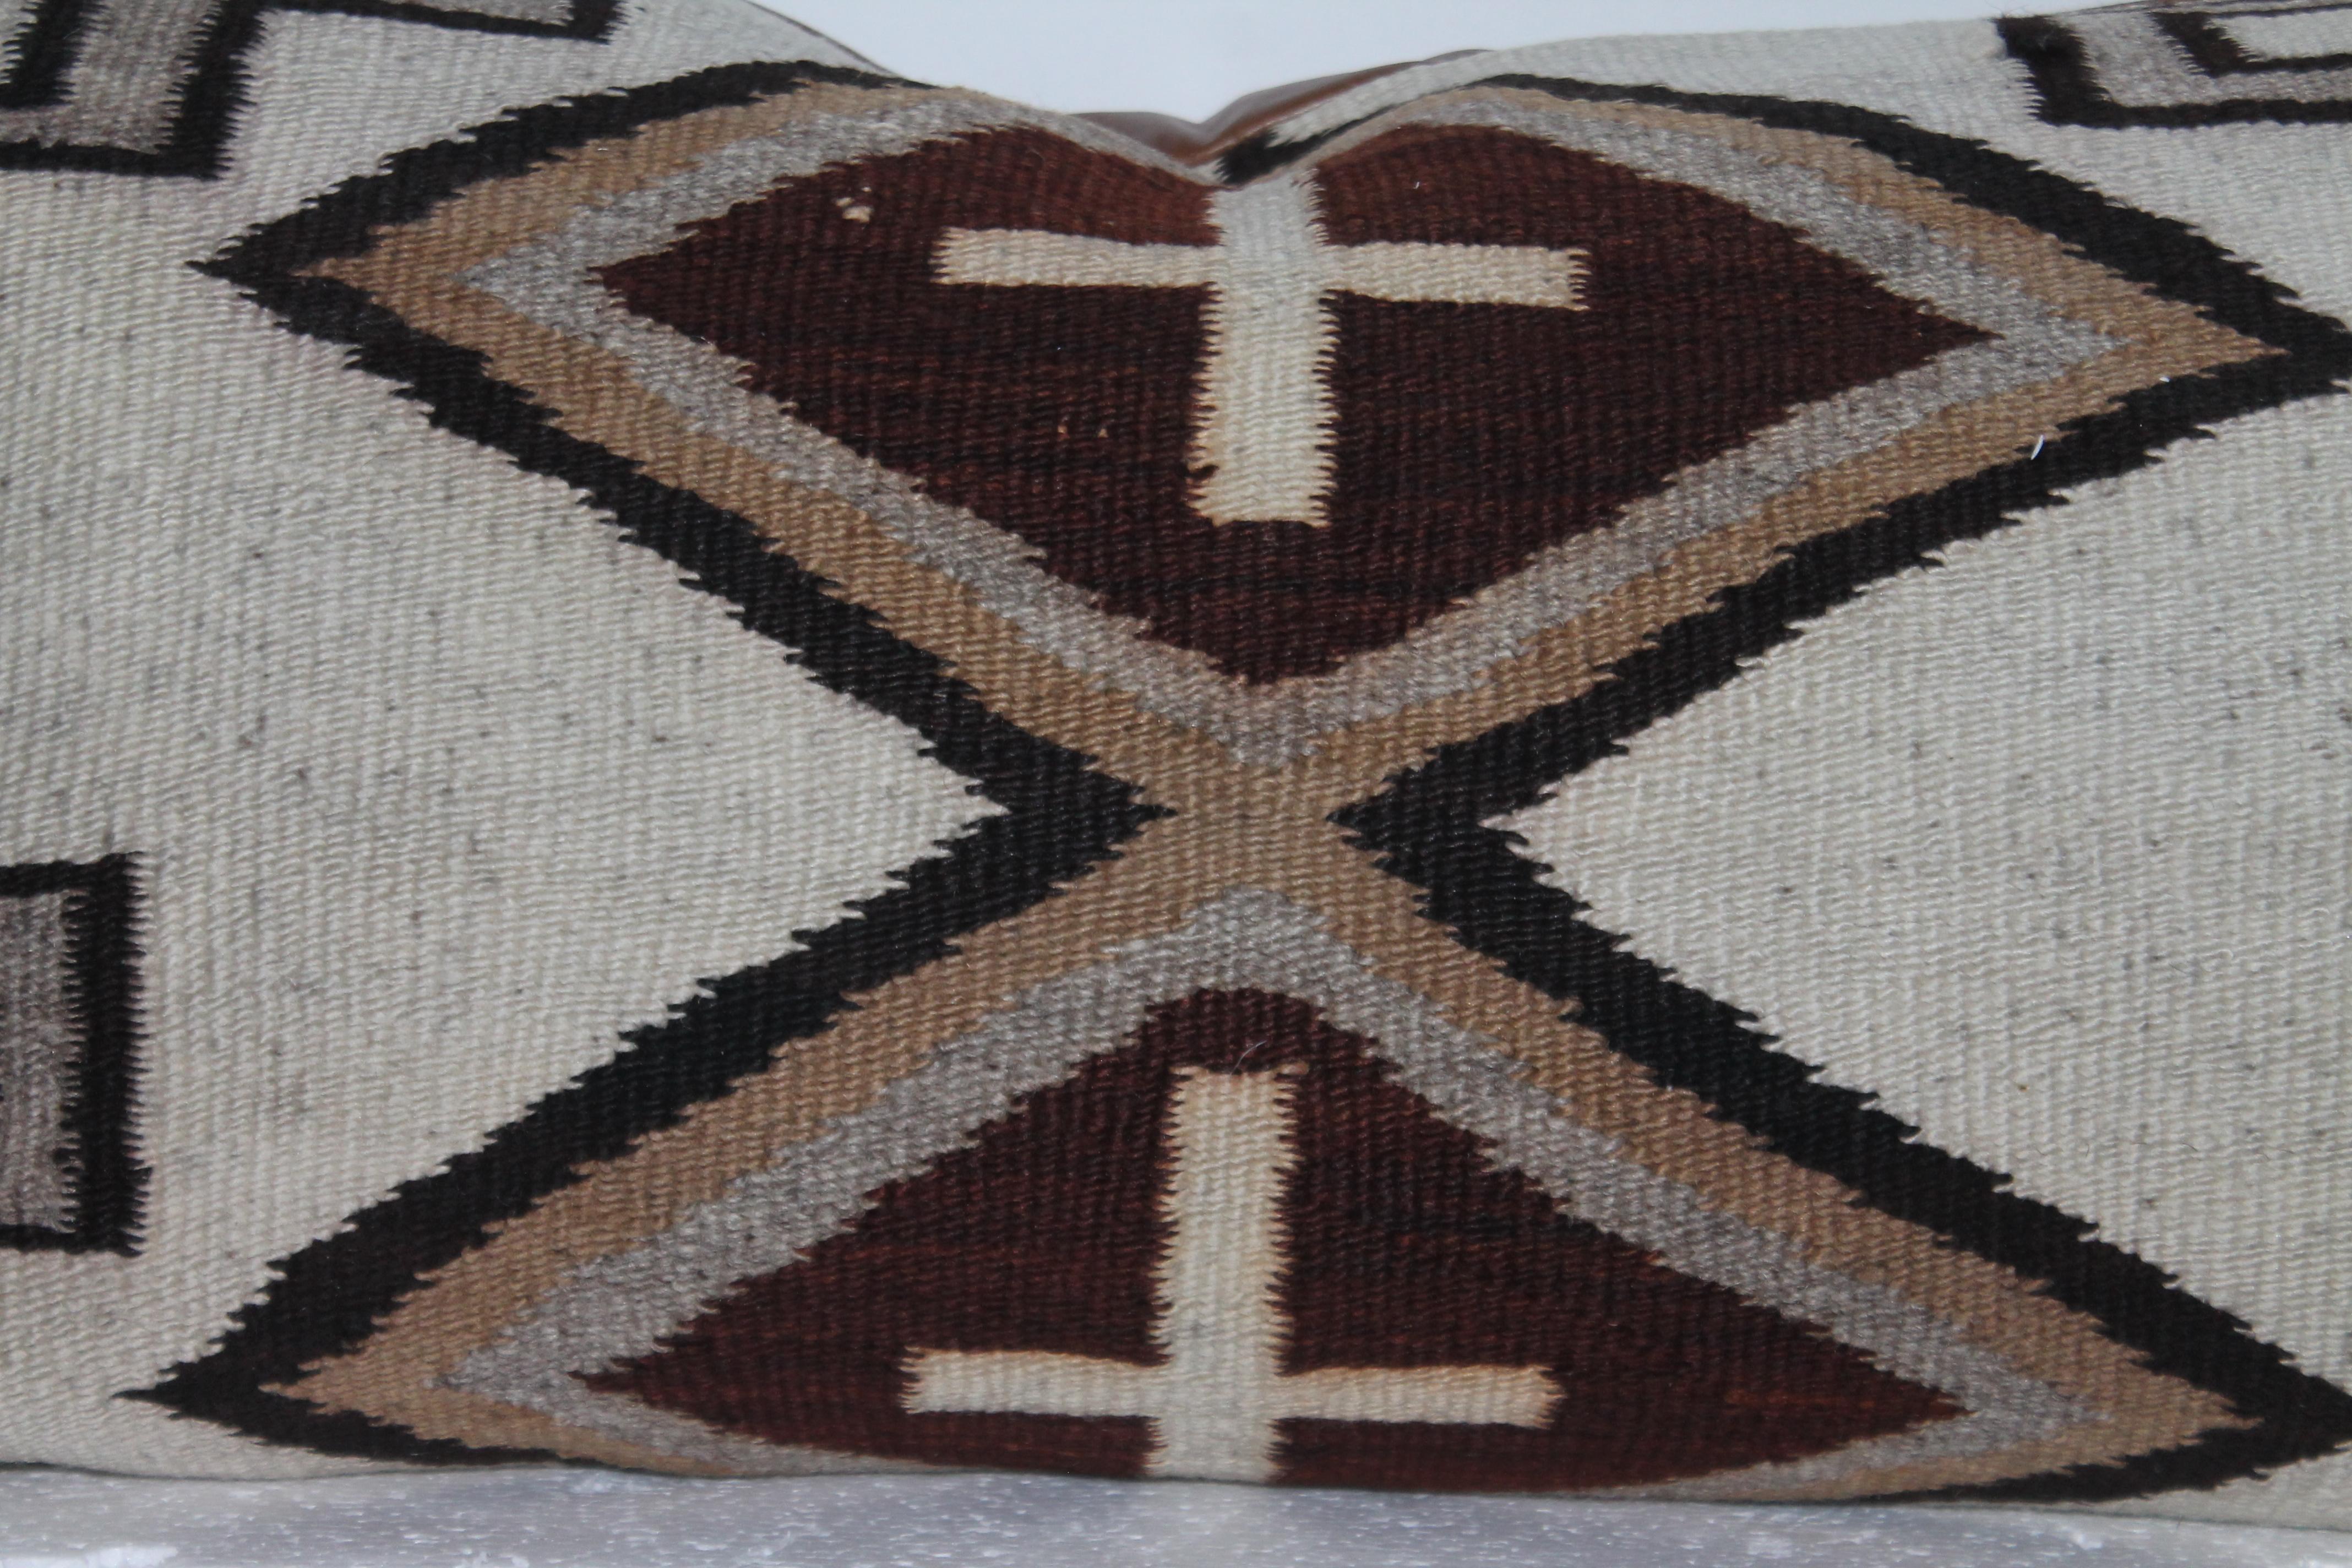 This large Navajo Indian weaving bolster pillow has a leather backing and has crosses for a design pattern. The condition is very good.